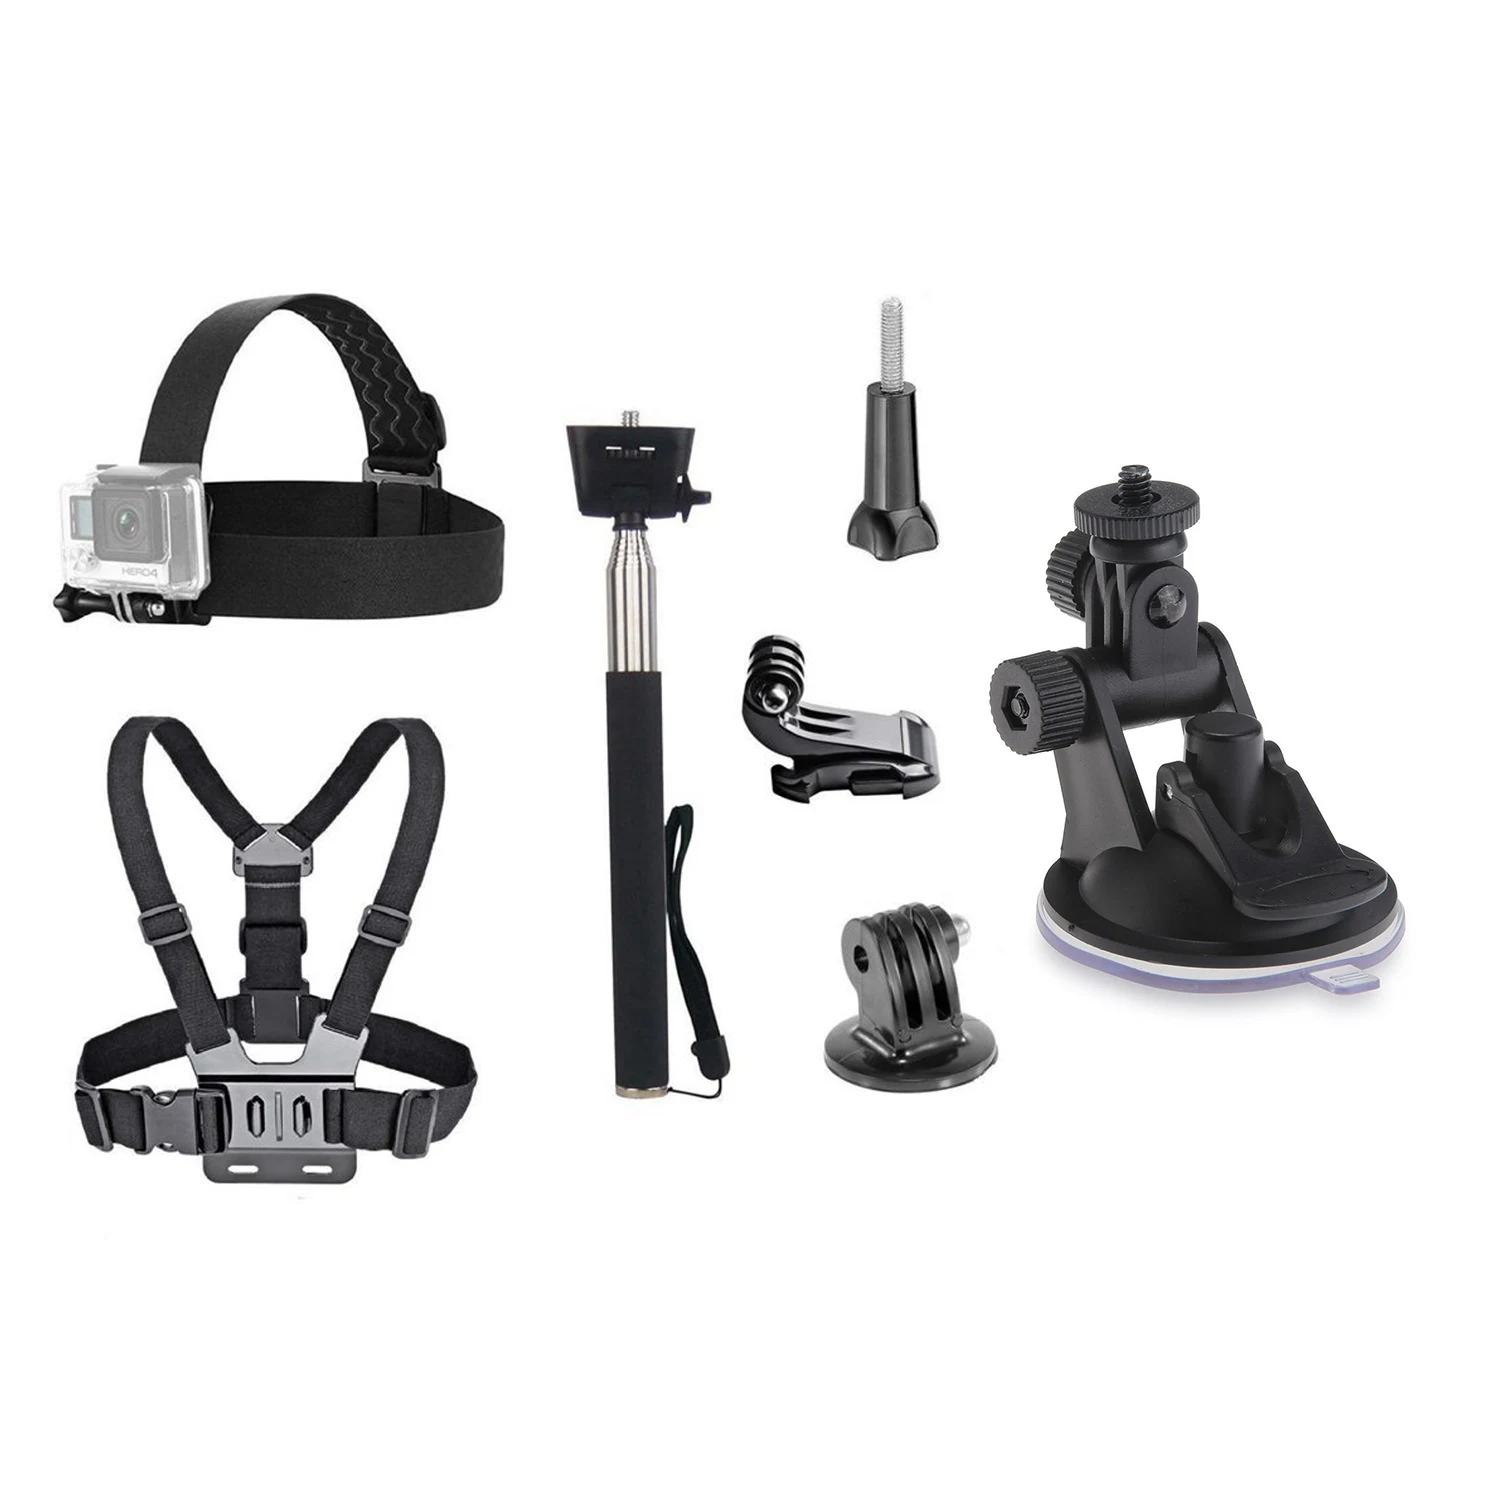 

Suction Fixing Holder For Camera Gopro Hero GPS & 3 In 1 Head Strap Mount/Chest Harness/Selfie Stick For Gopro Hero 6 5